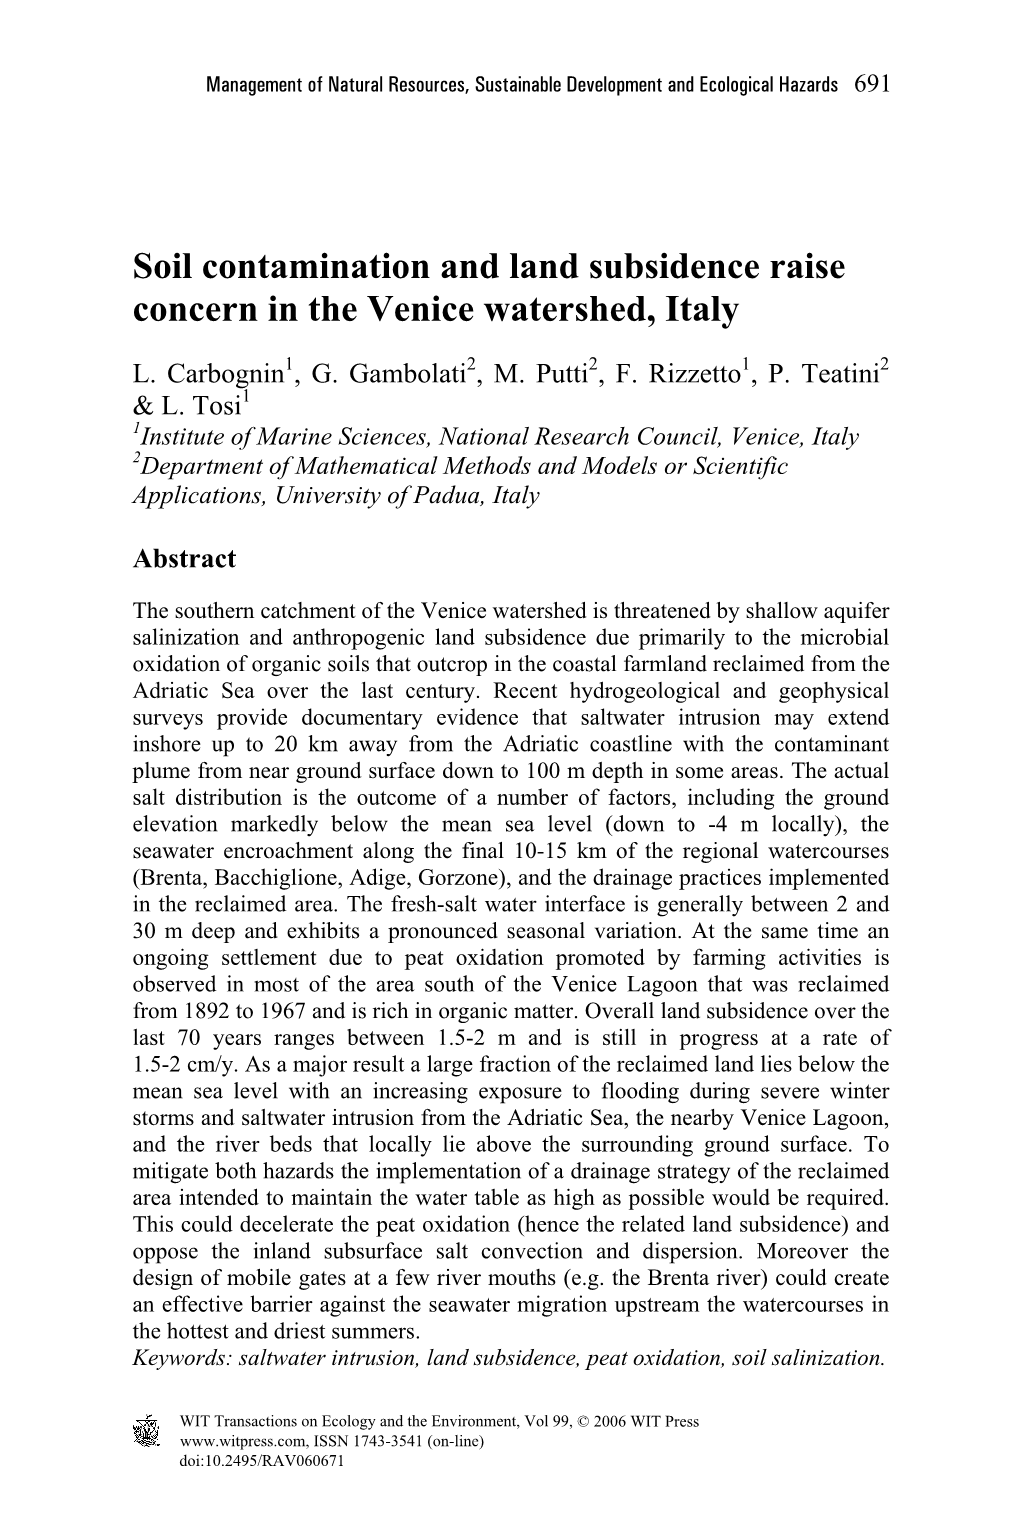 Soil Contamination and Land Subsidence Raise Concern in the Venice Watershed, Italy